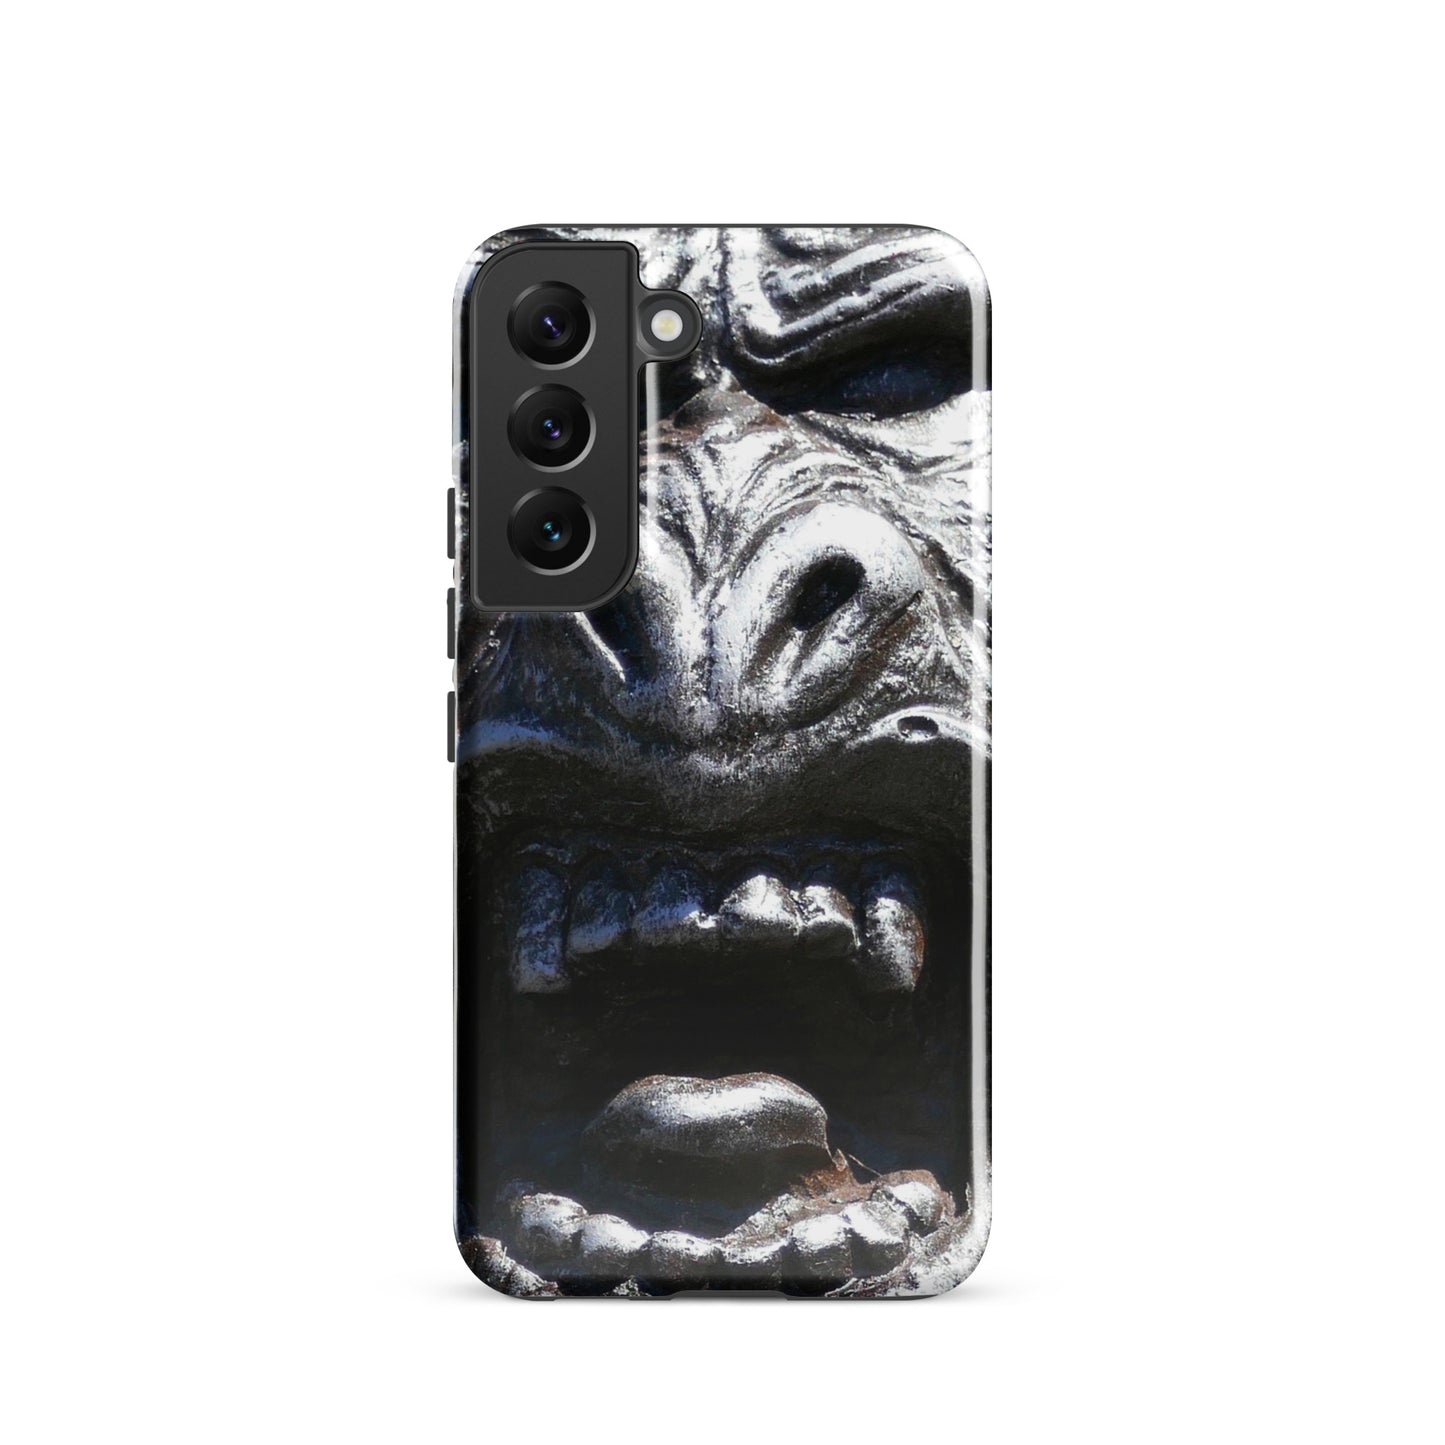 Frenzy Scream - Tough case for Samsung ( Galaxy S24 Ultra - Galaxy S10 ) - Fry1Productions